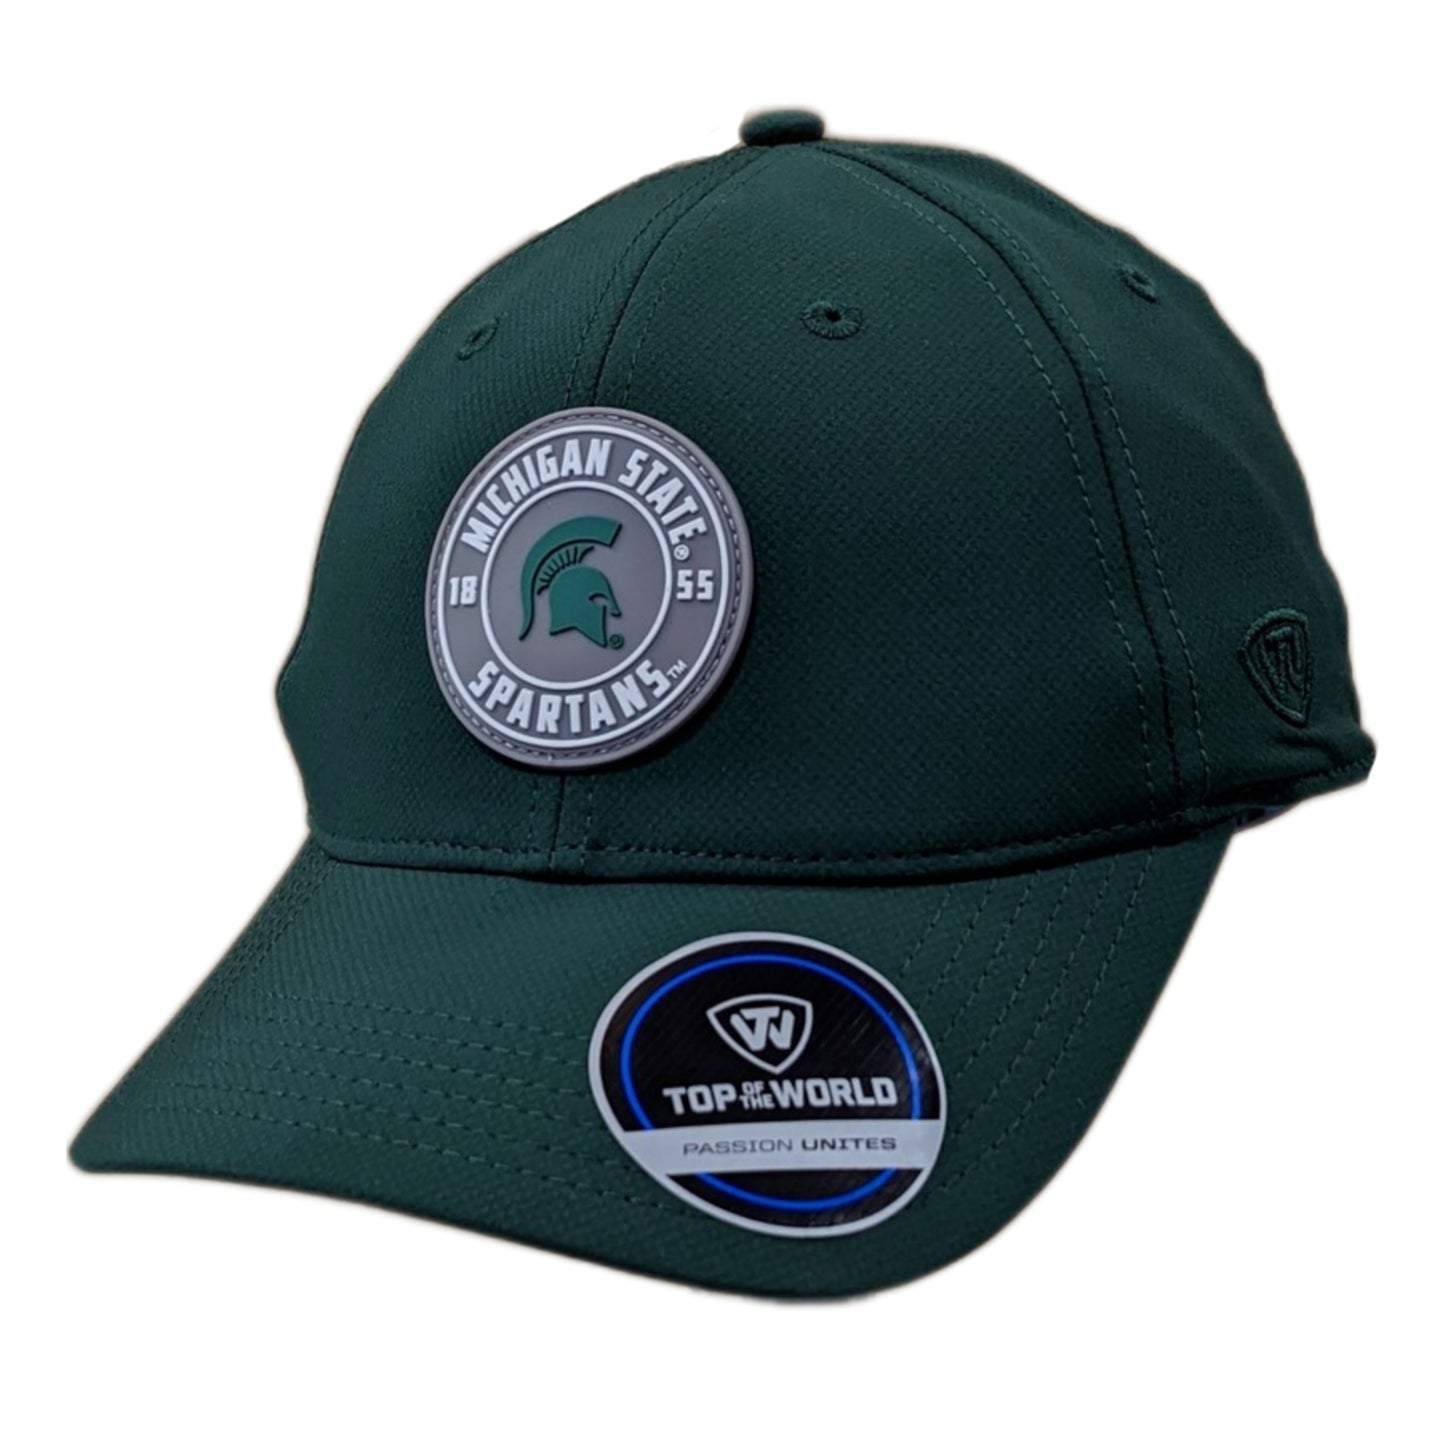 Men's Michigan State Spartans Top of the World Green Performance Adjustable Hat